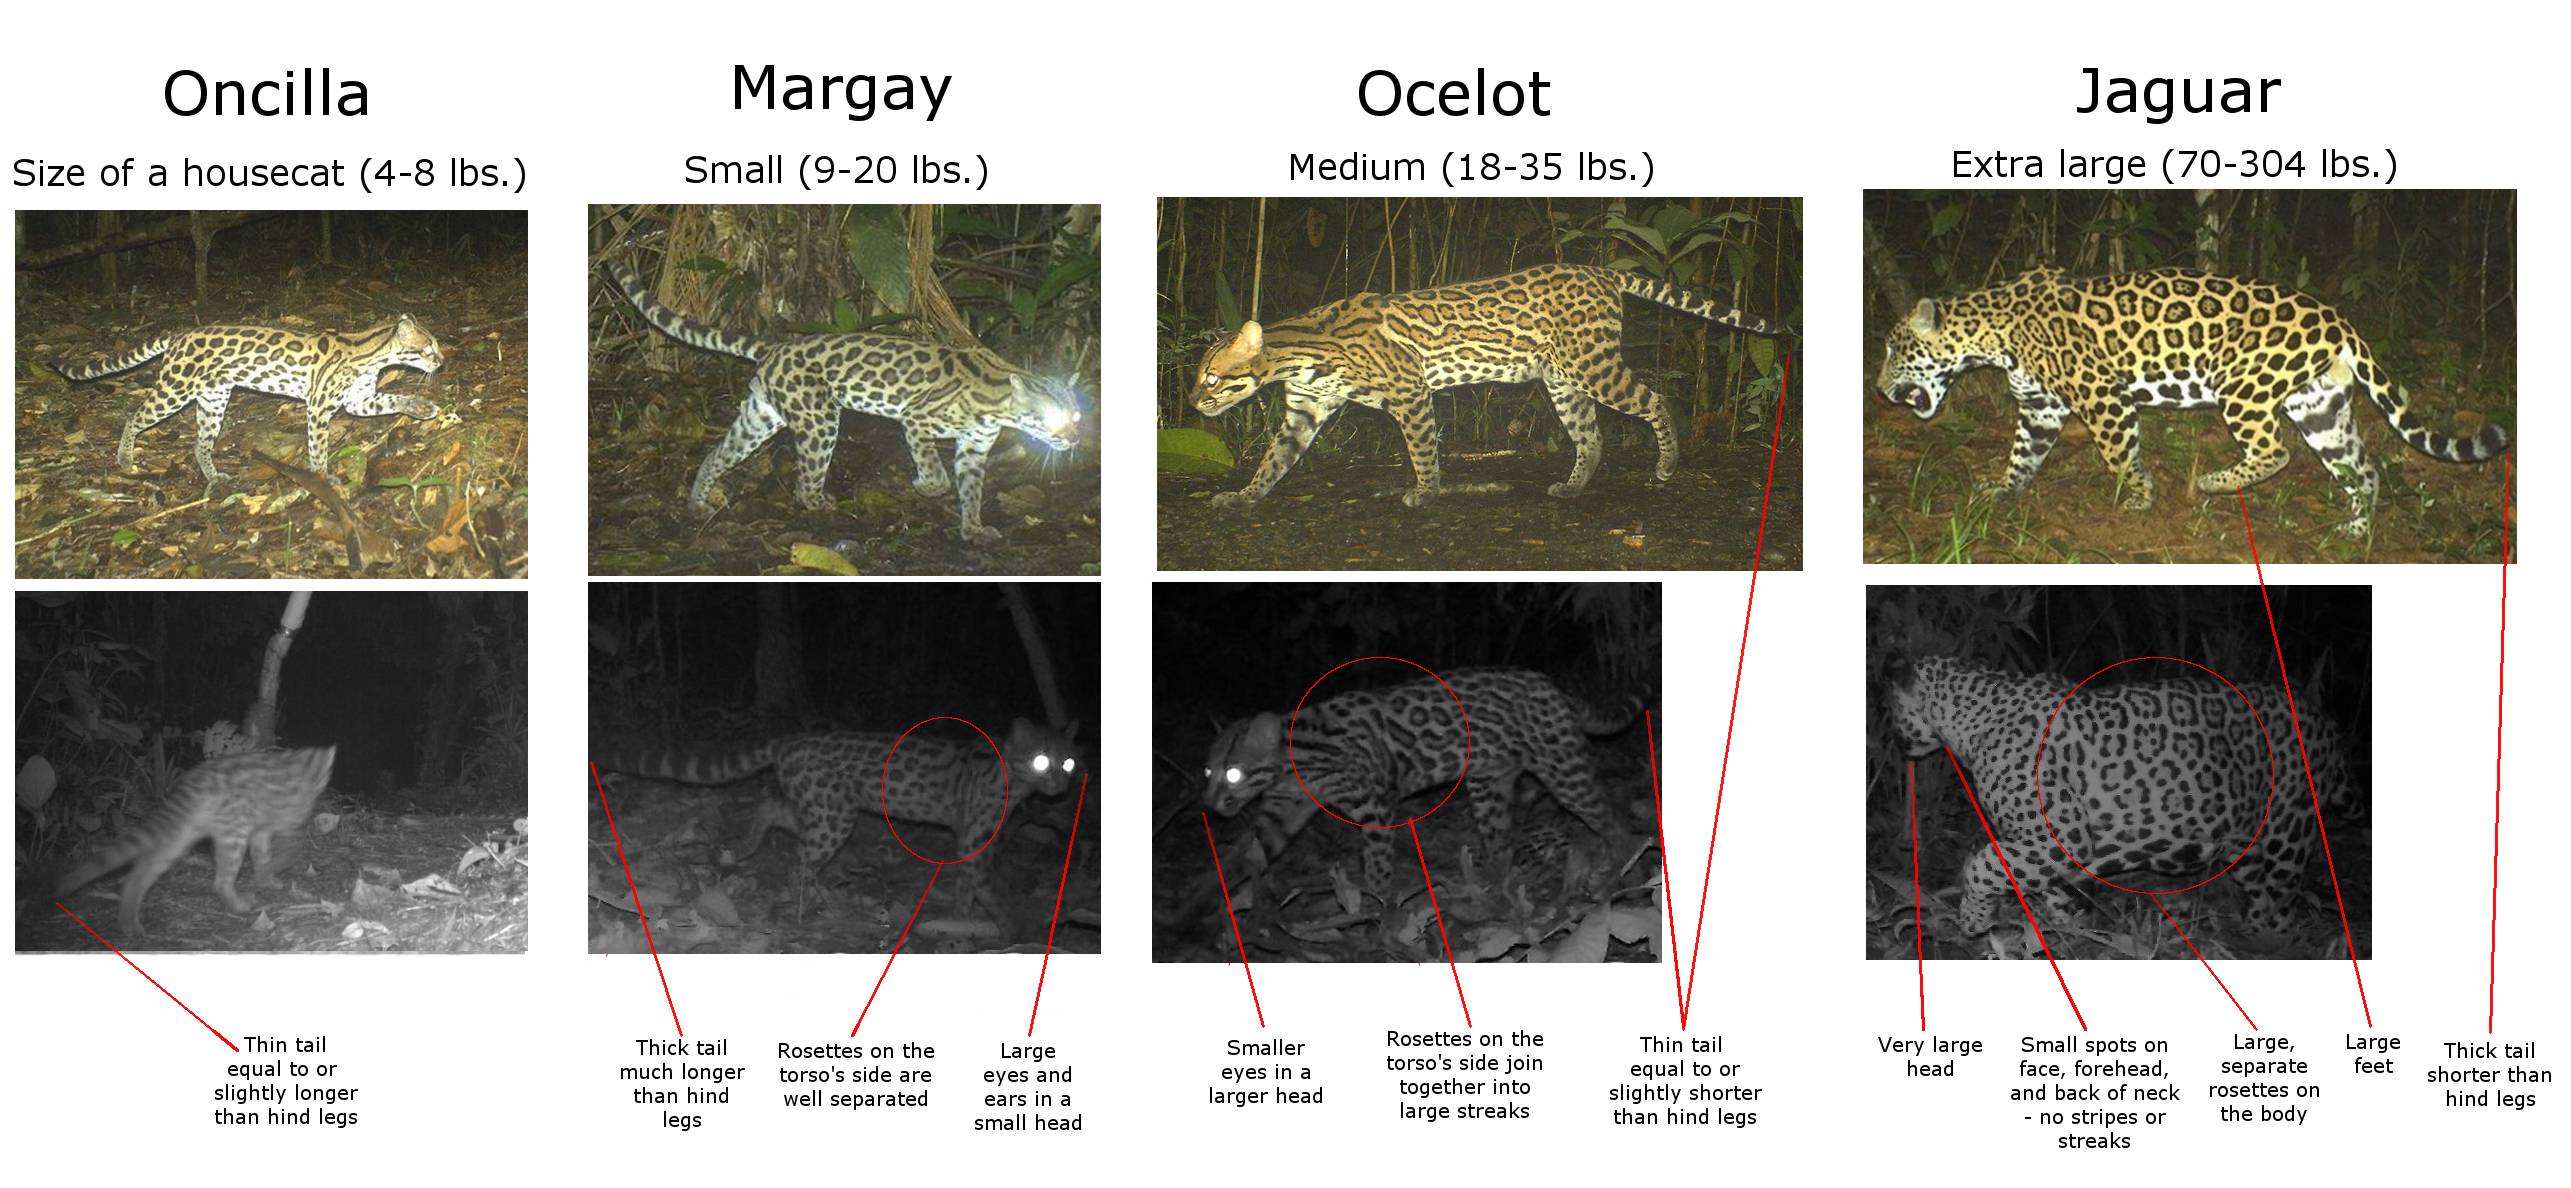 Is a Margay and ocelot the same?